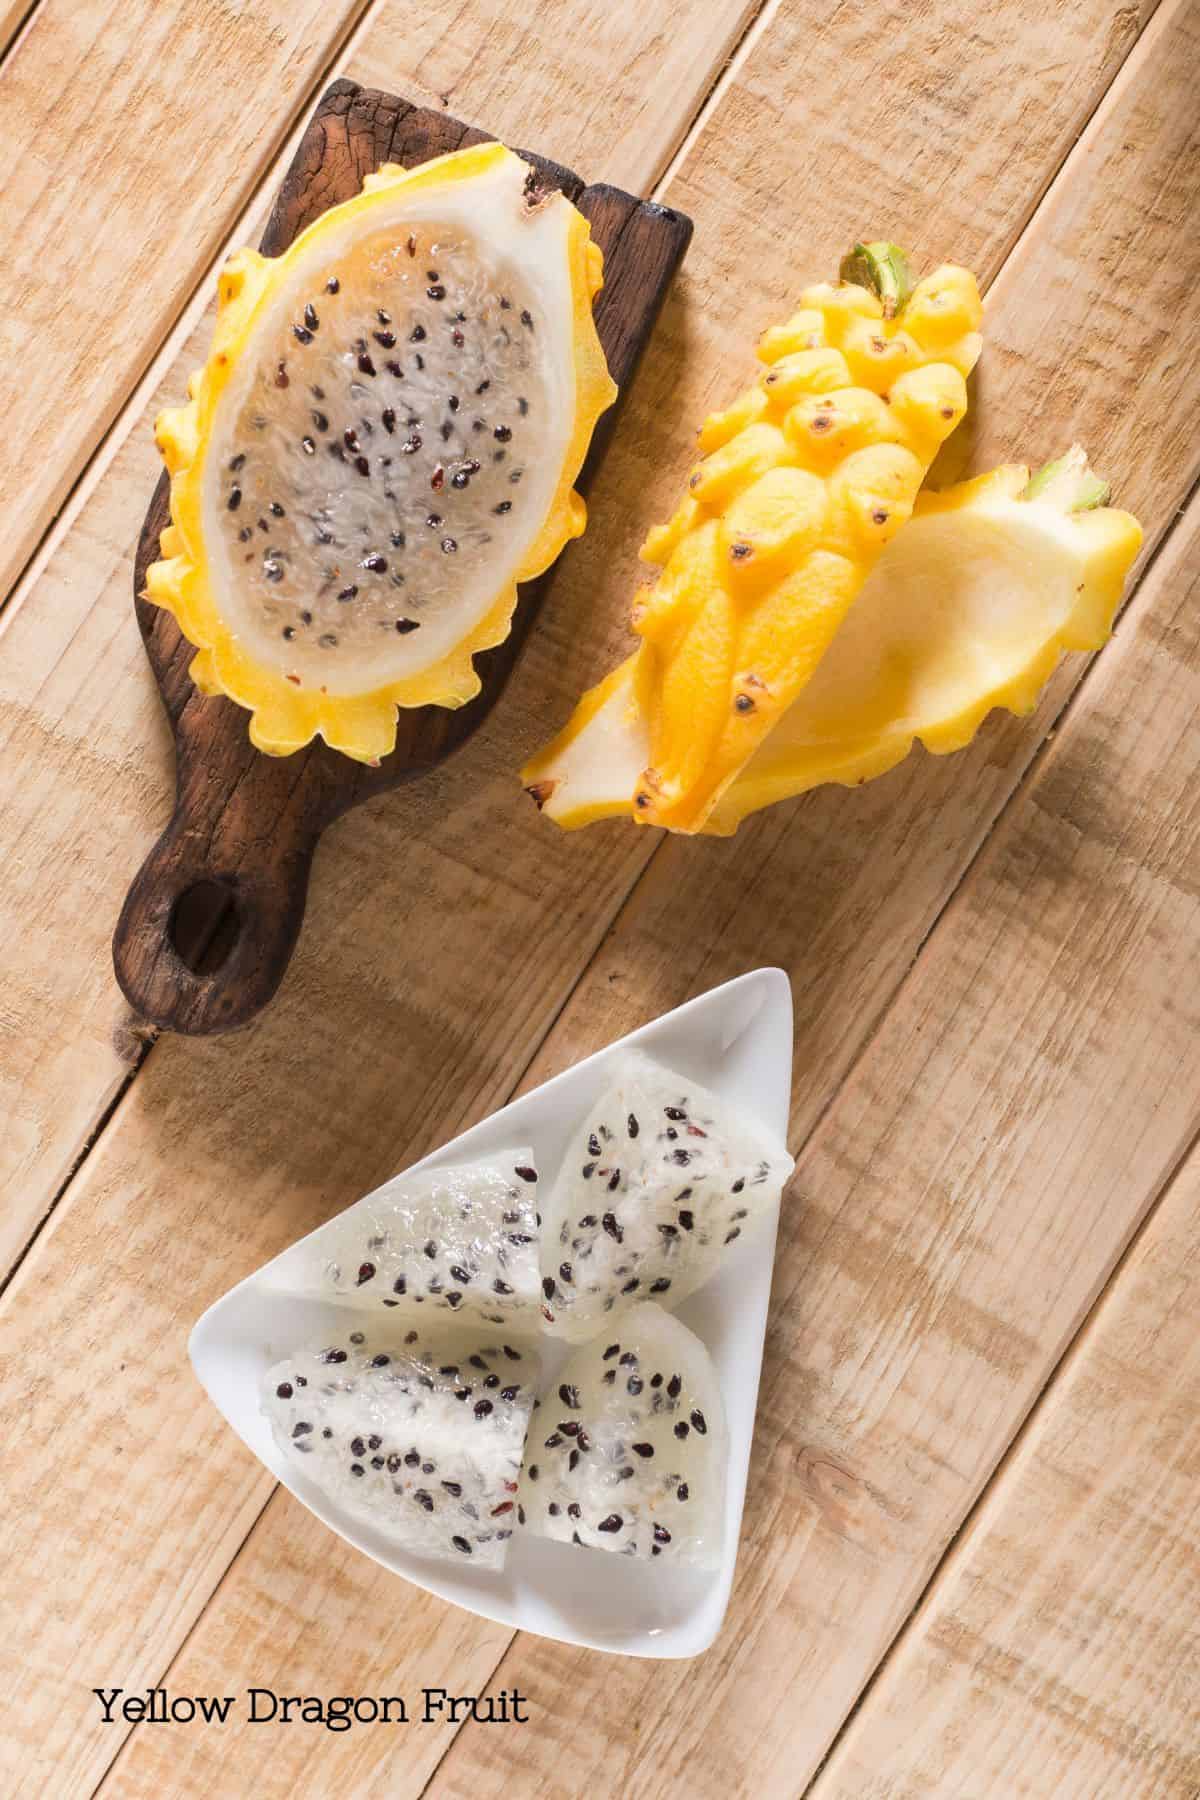 A bowl of yellow dragon fruit cut up with whit flesh and black seeds.